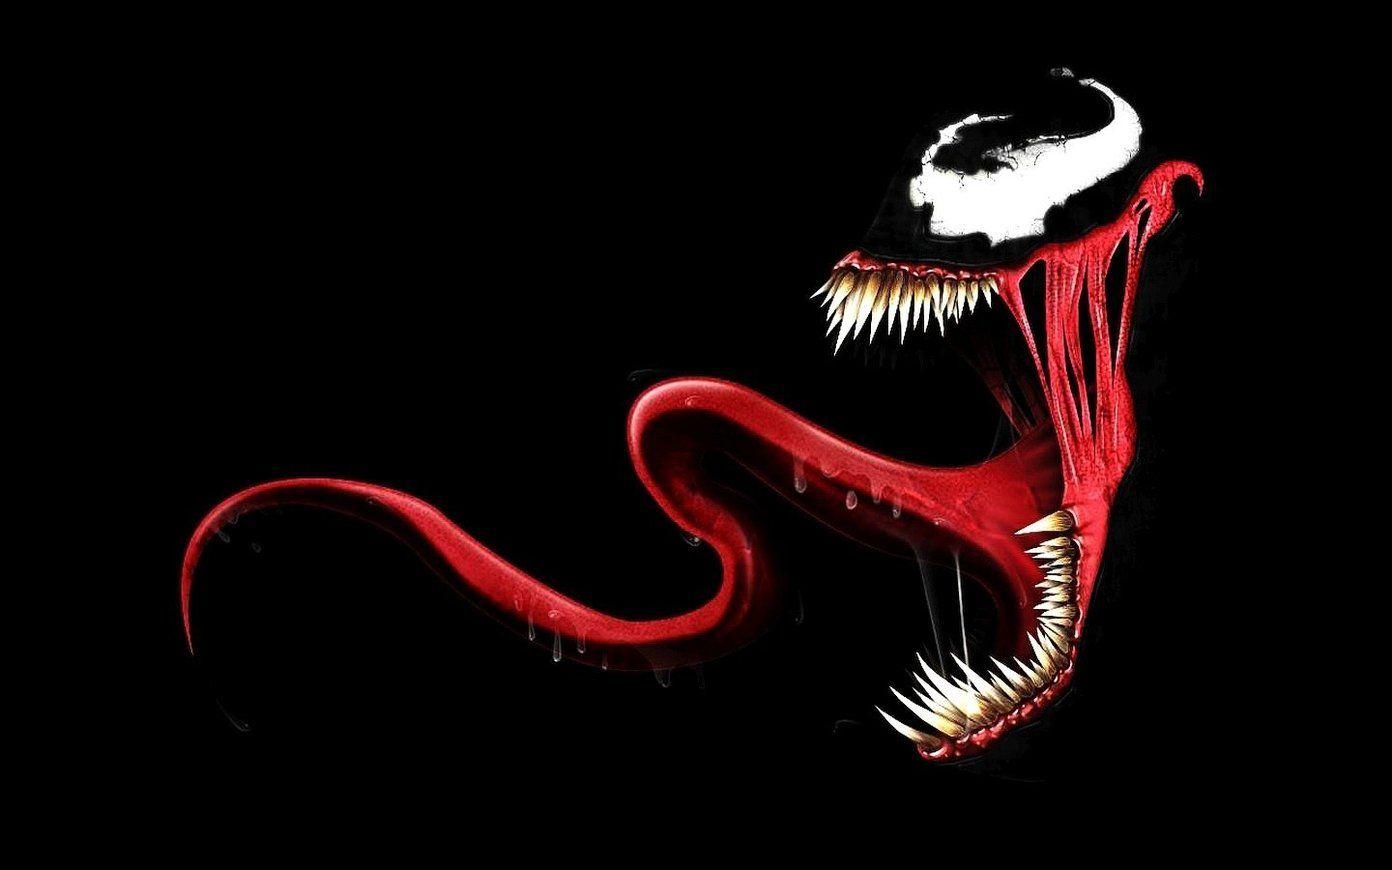 Best Venom HD Wallpaper That You Should Get Right Now